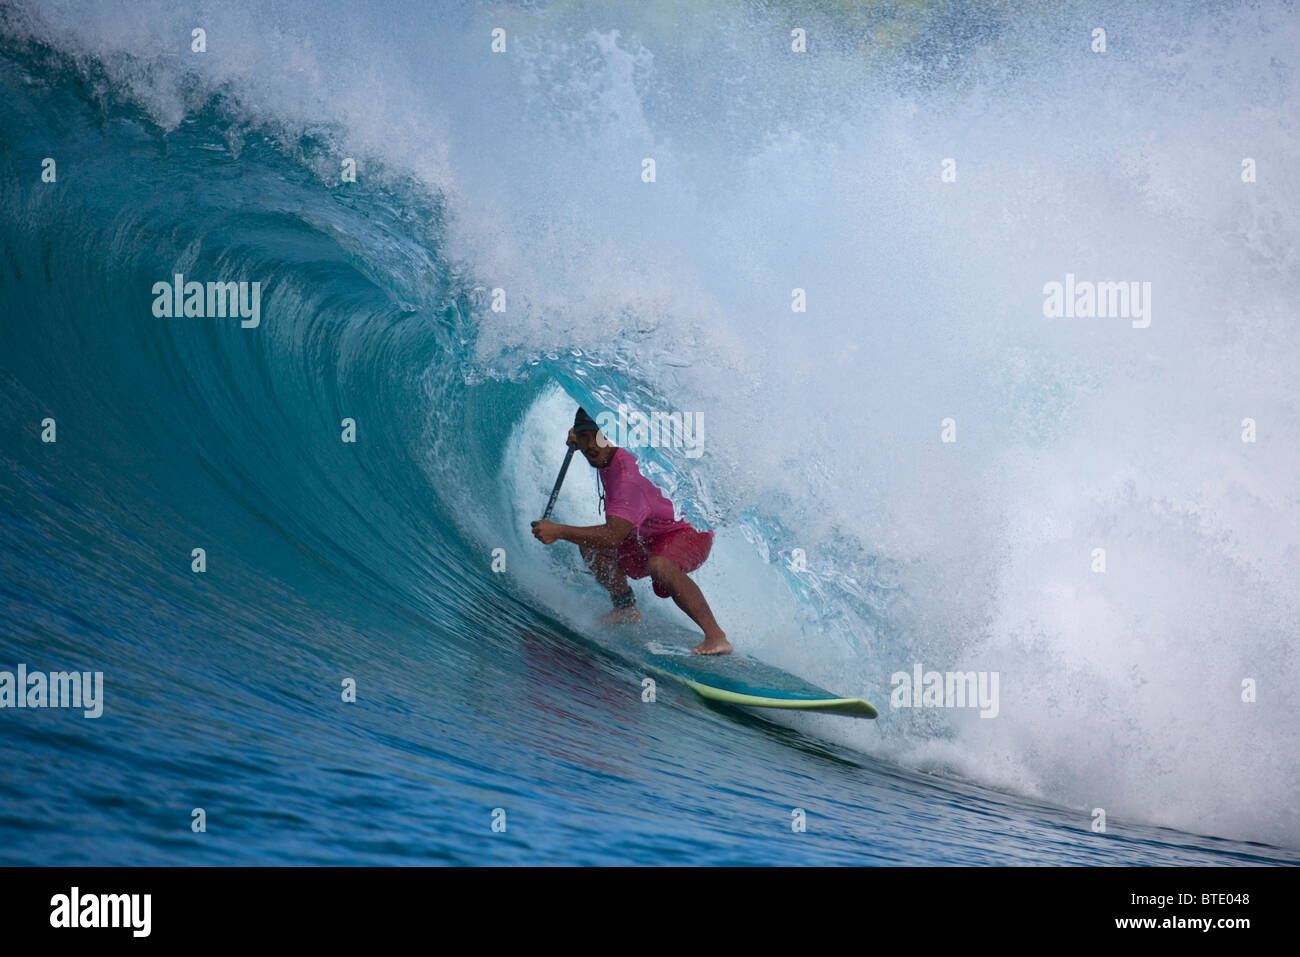 Man surfing in the tube of a wave Stock Photo